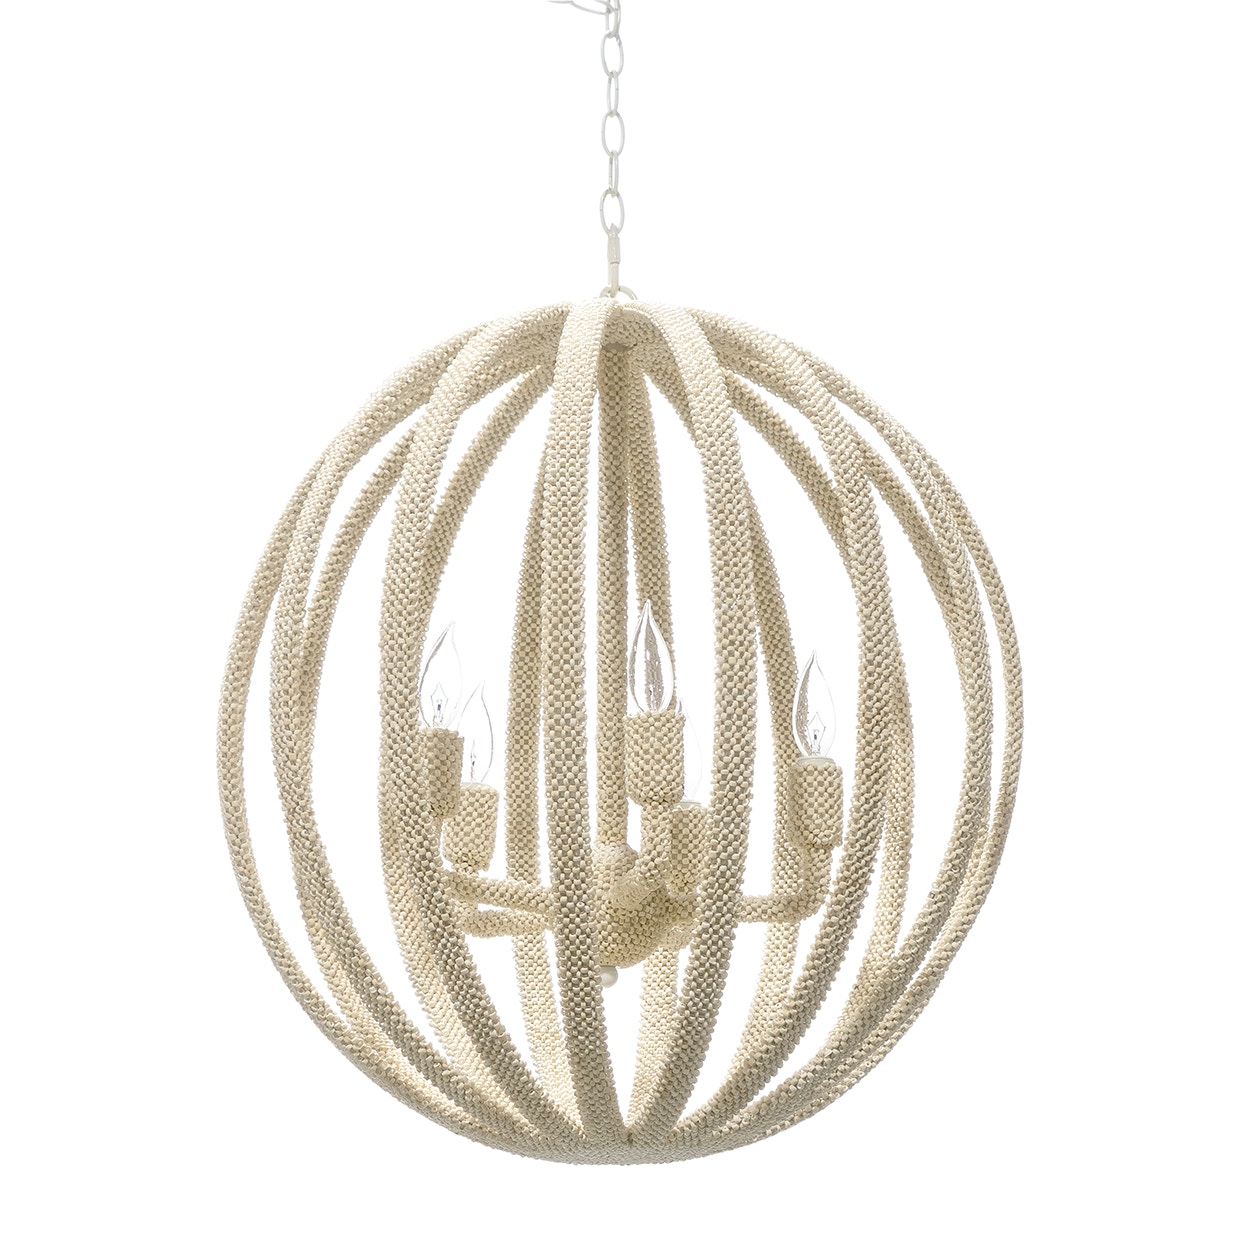 Classic metal chandelier silhouette fully covered with tiny woven 